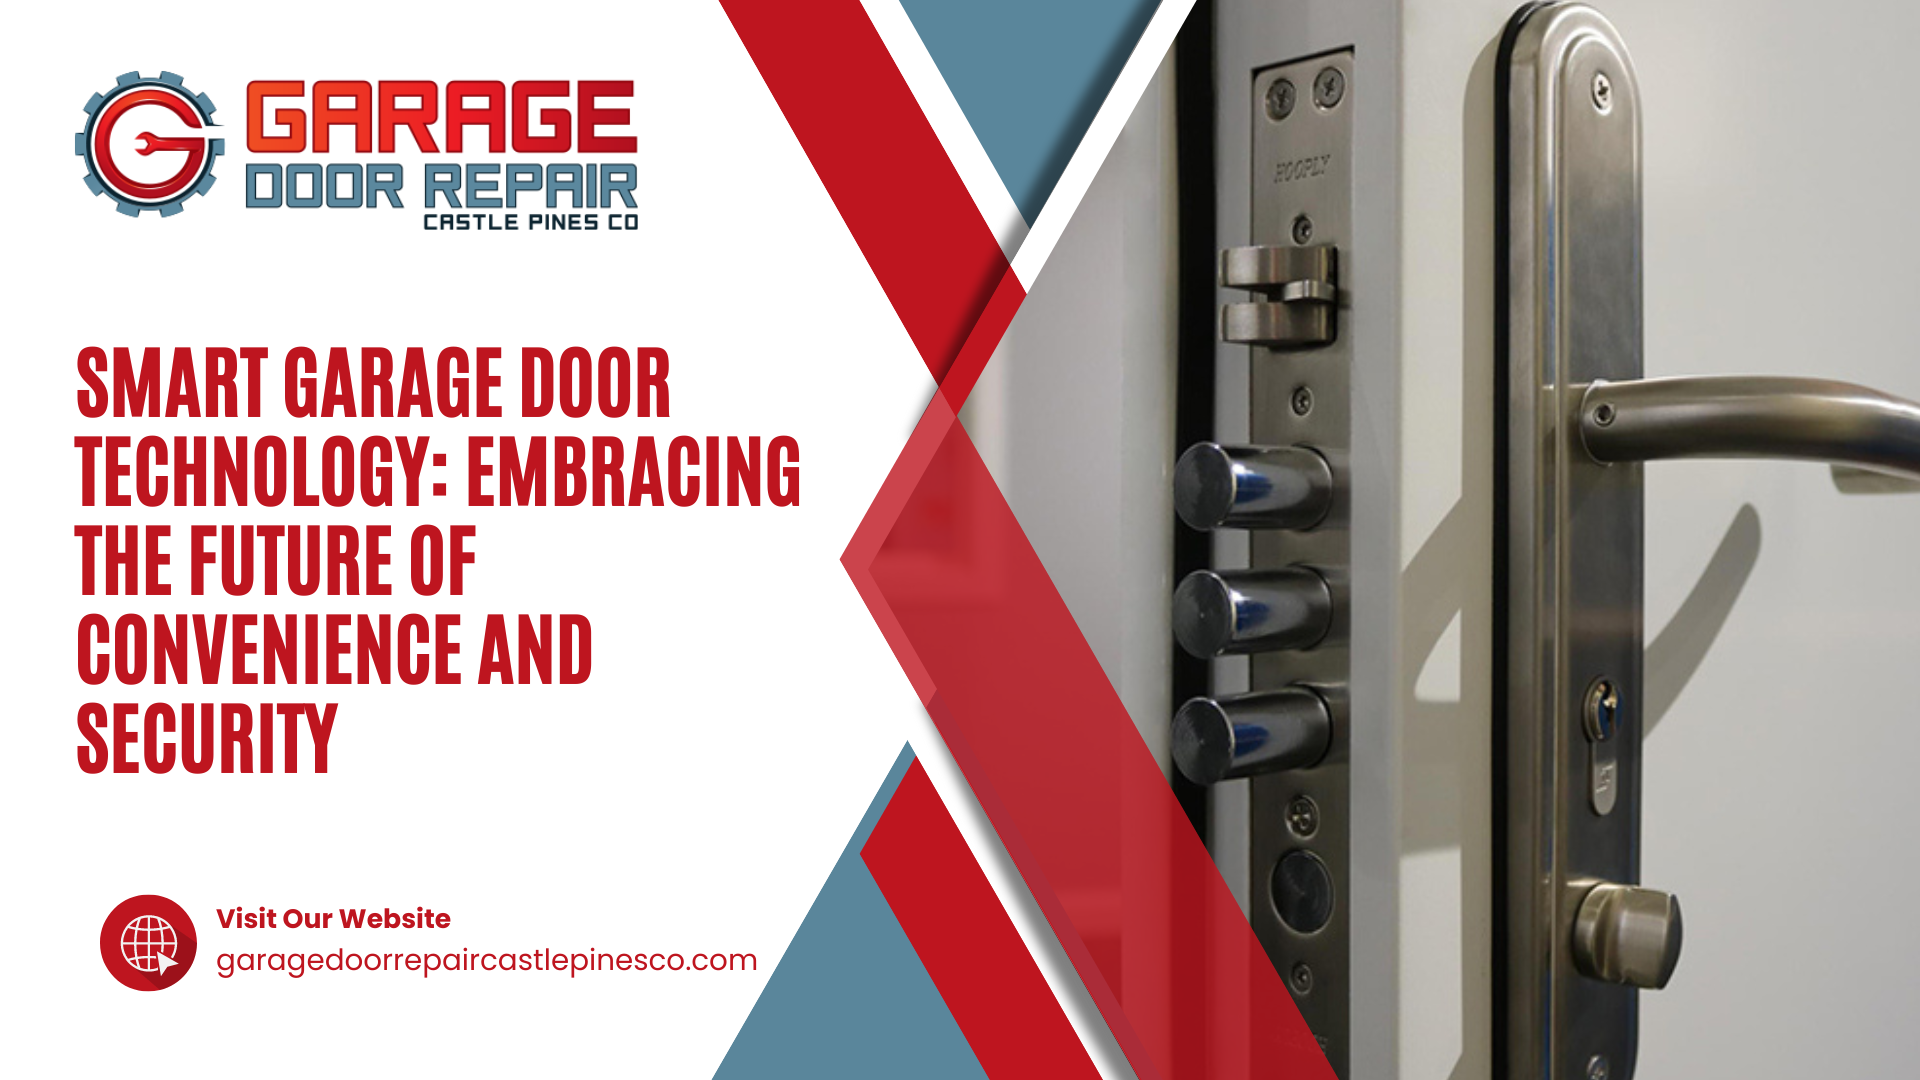 Smart Garage Door Technology Embracing the Future of Convenience and Security